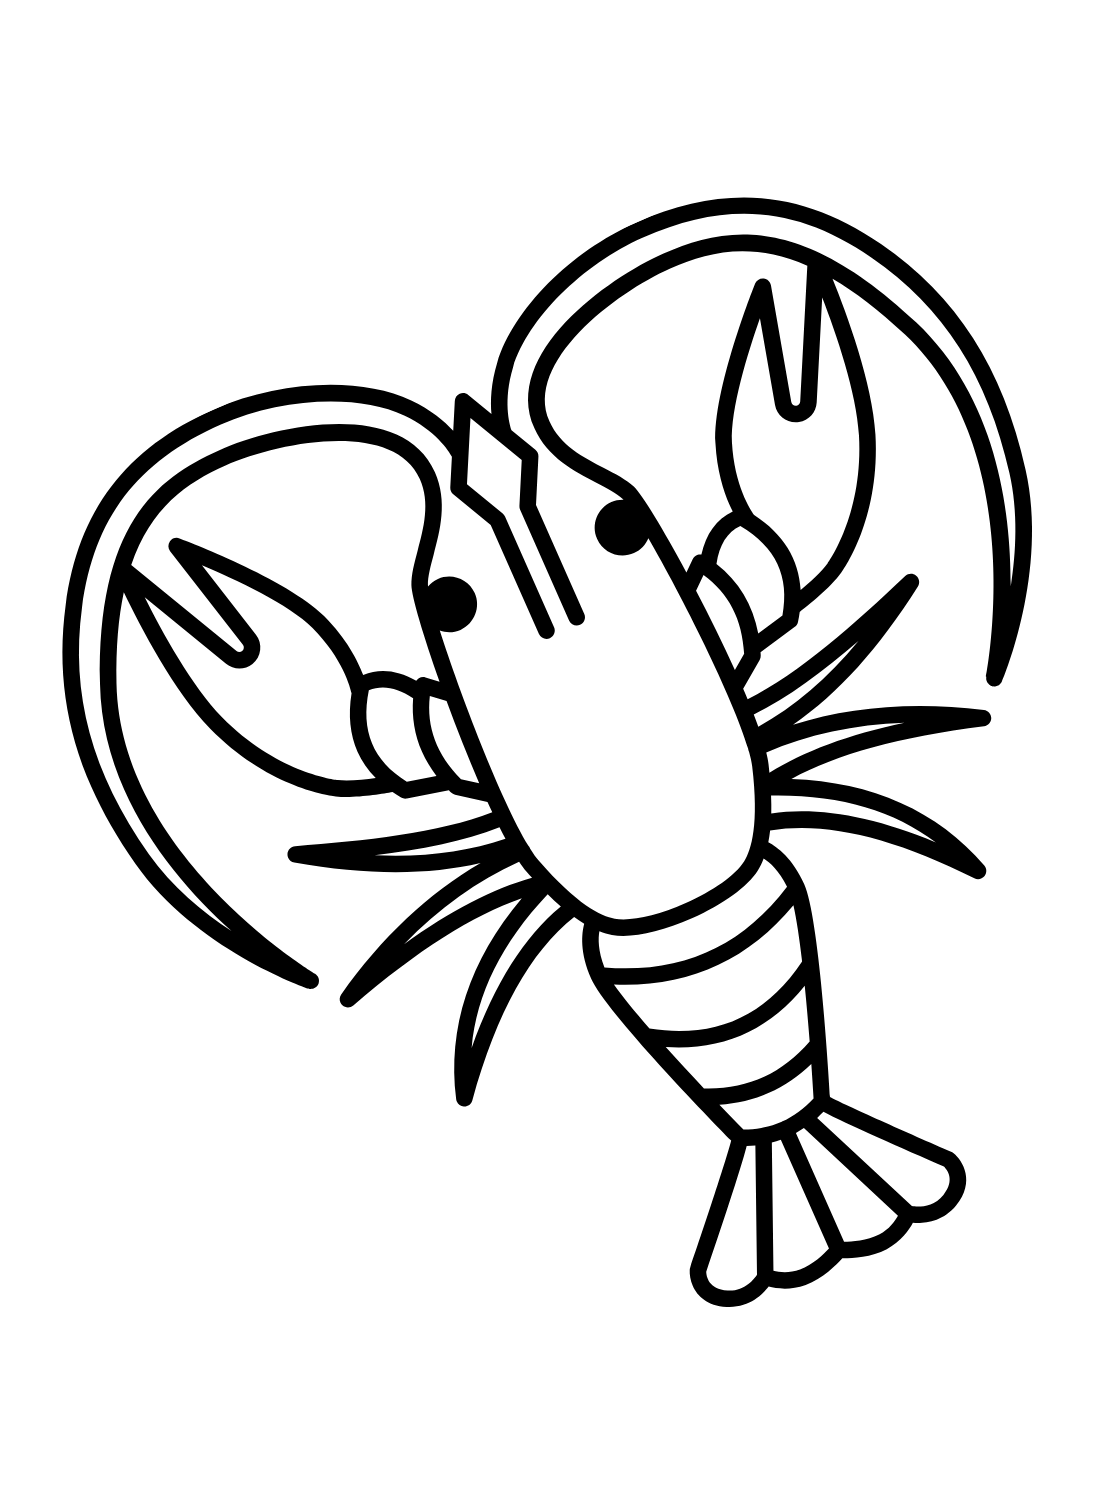 Crawfish color Sheets Coloring Page